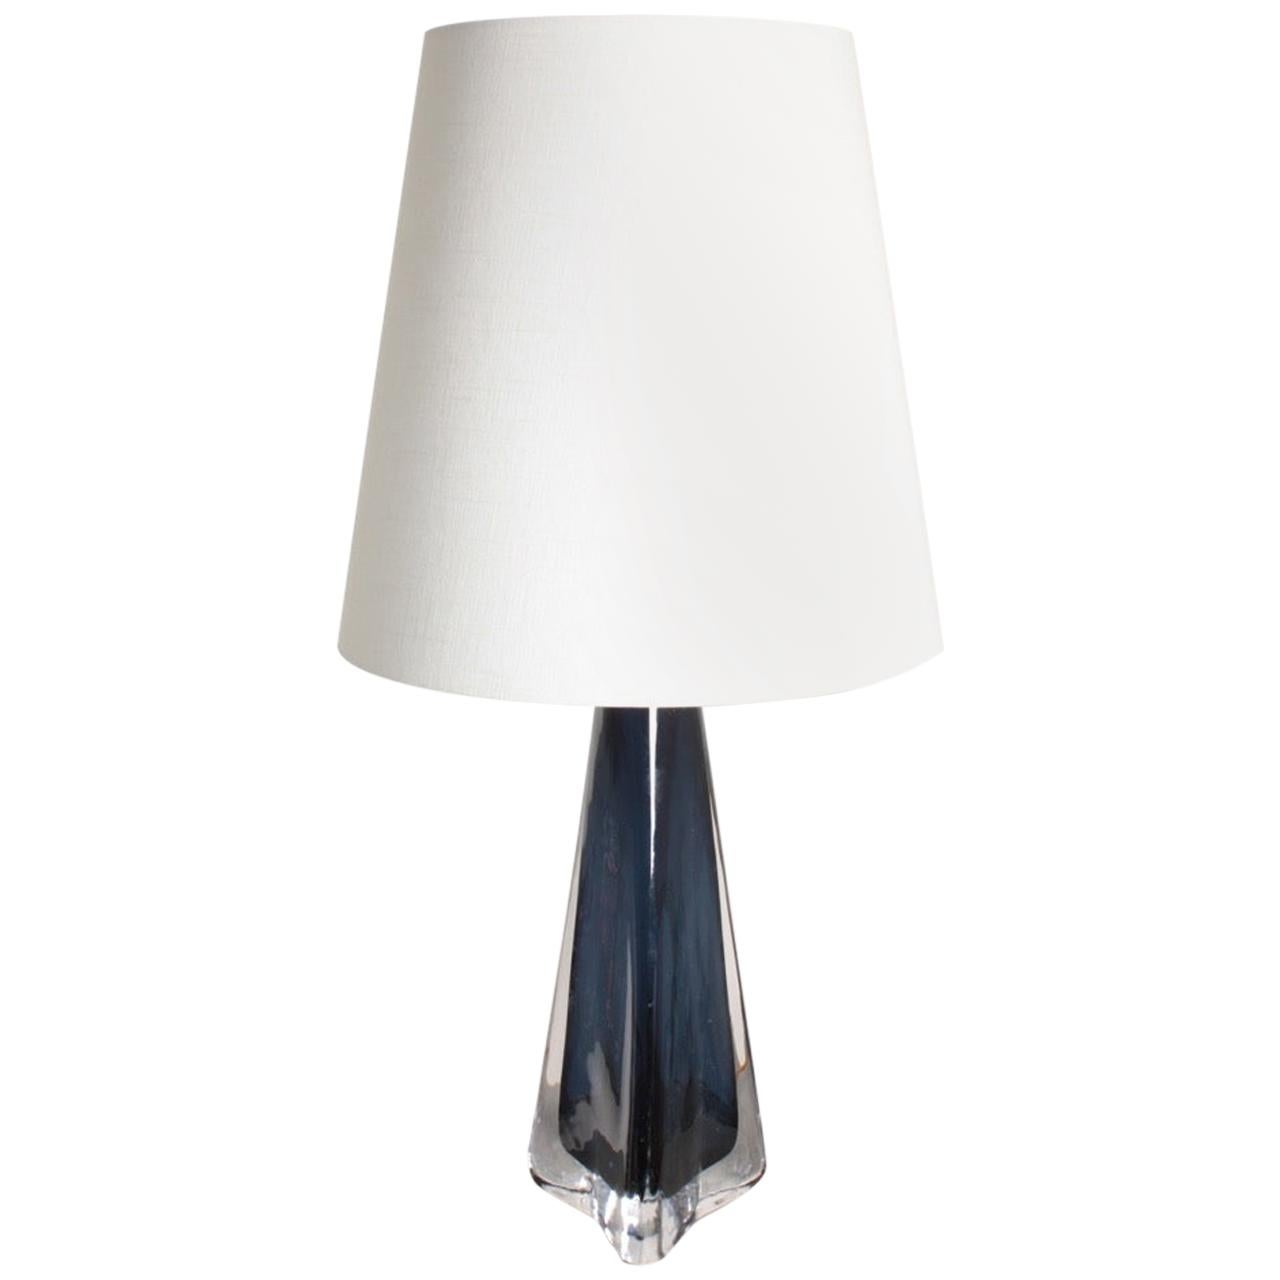 Large Midcentury Table Lamp Designed by Carl Fagerlund for Orrefors Glass, 1950s For Sale